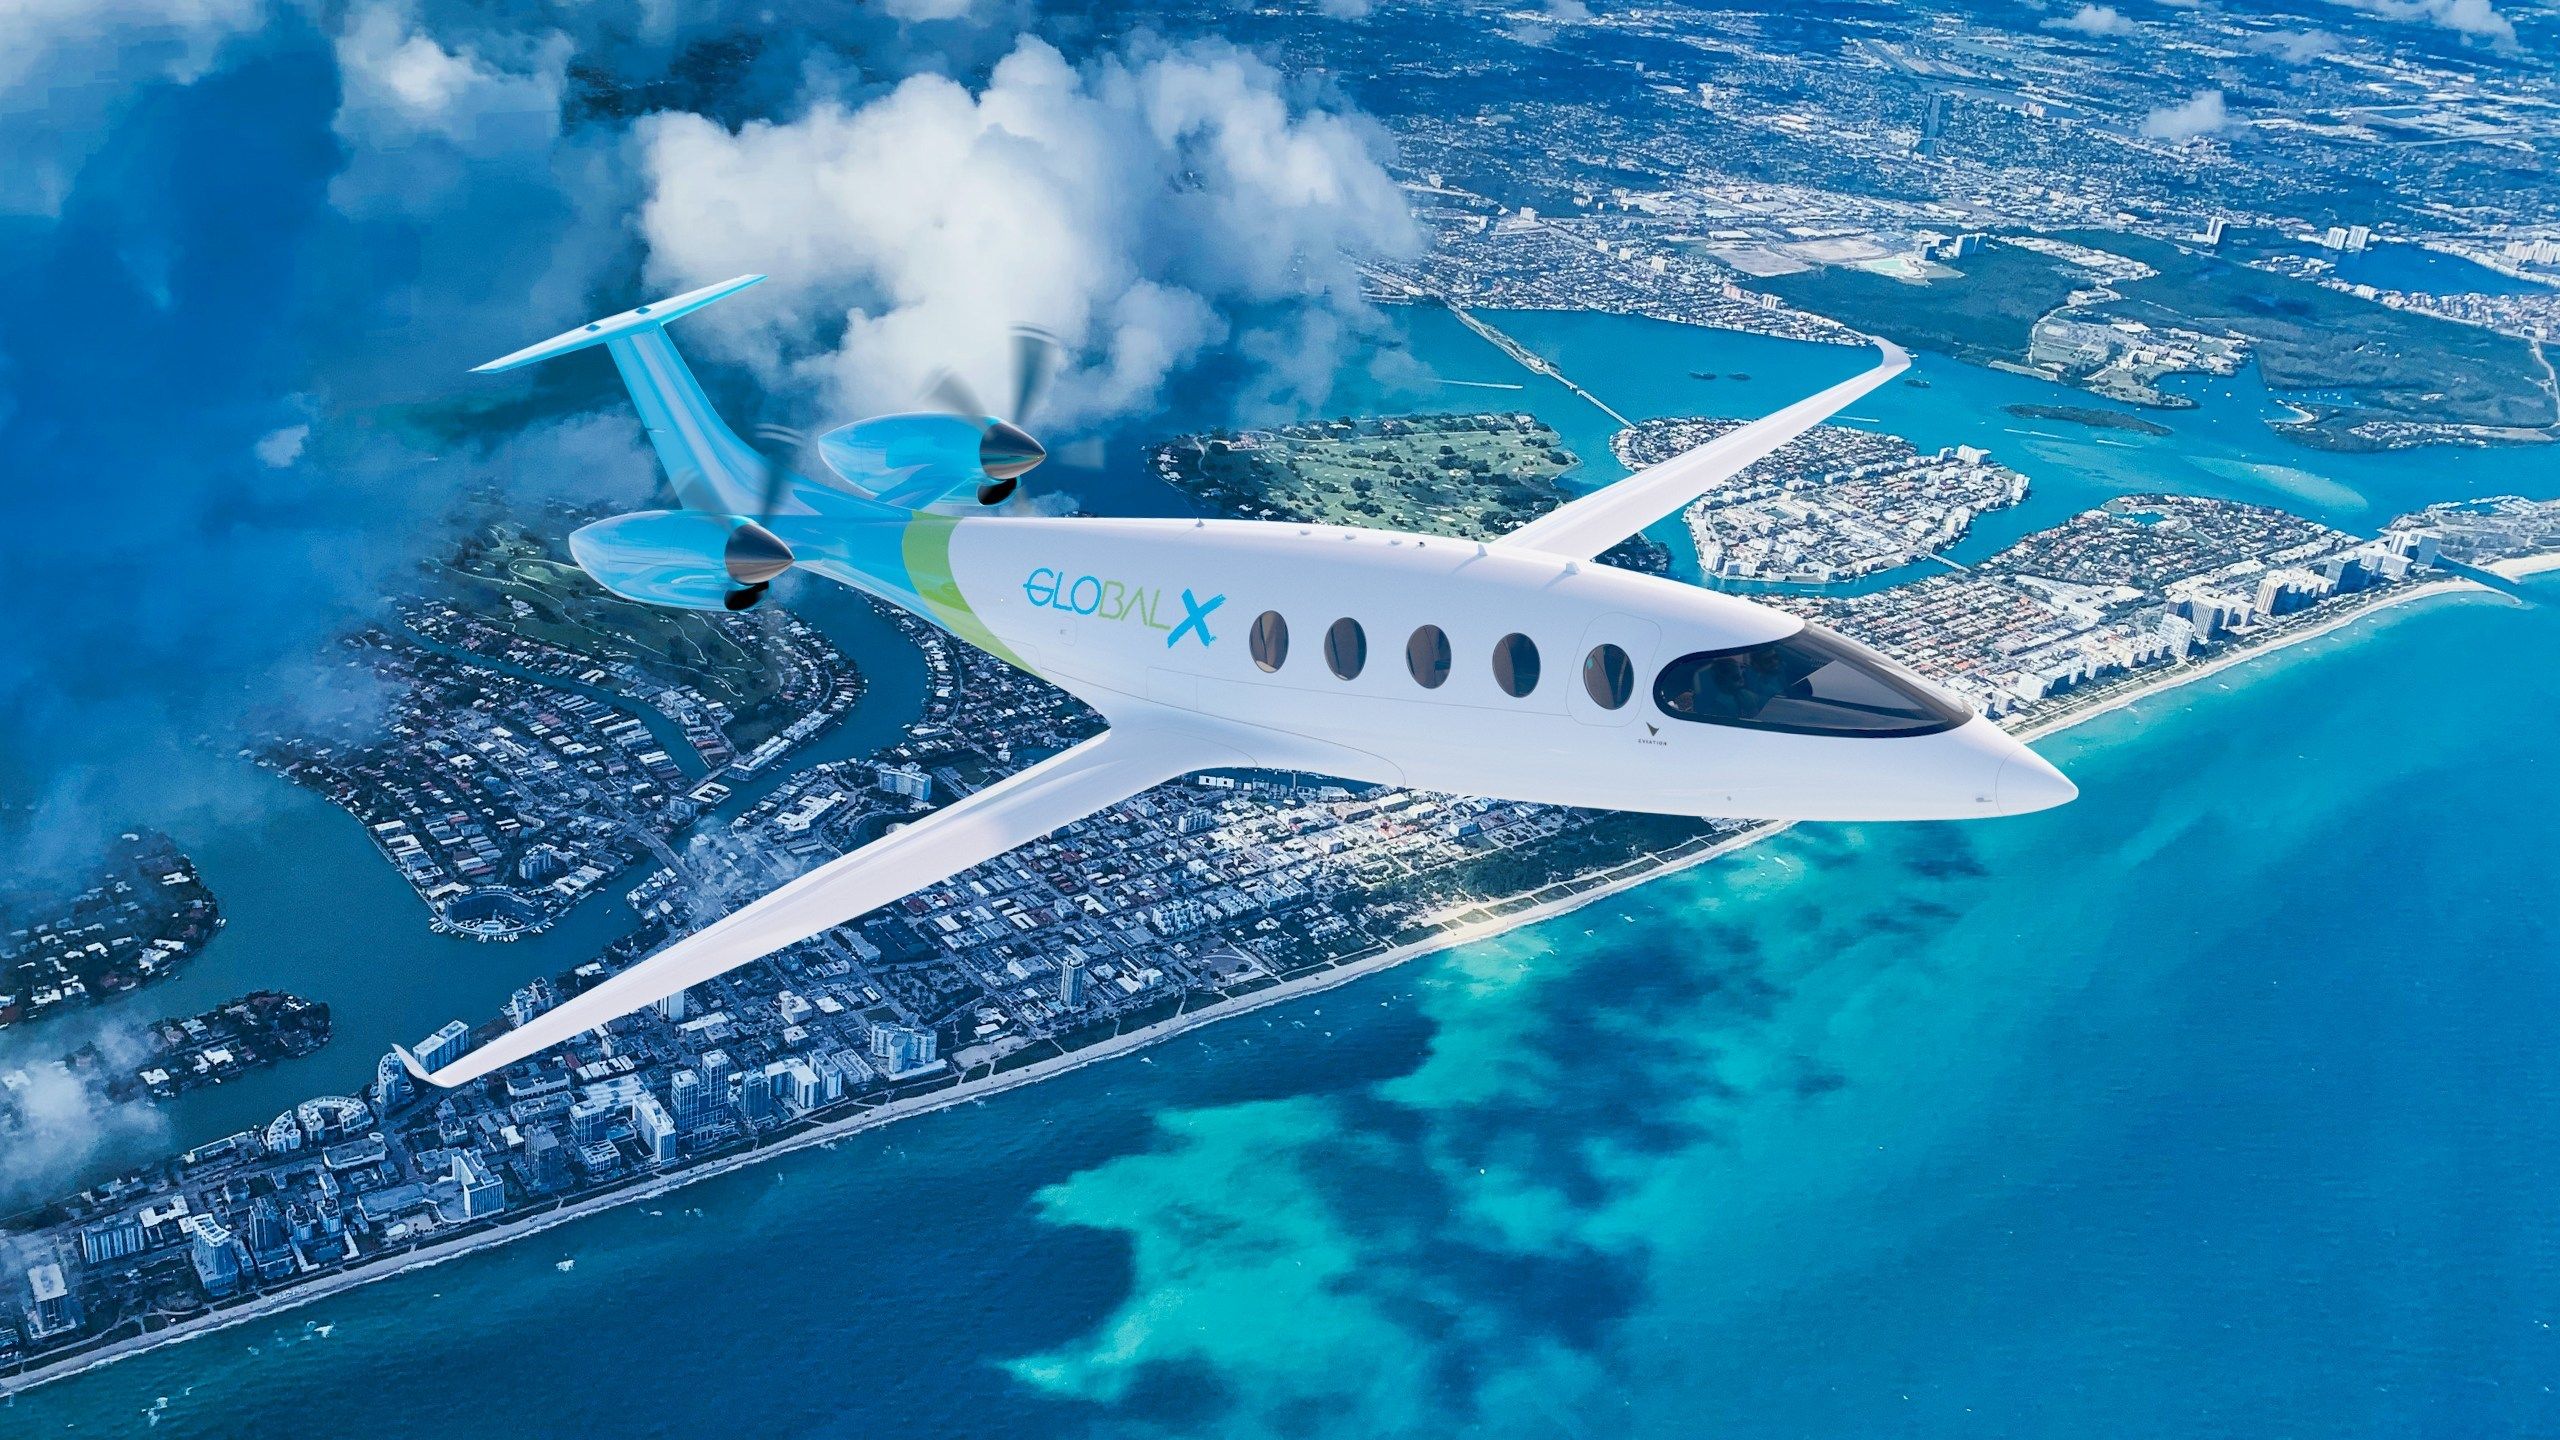 Global Crossing Airlines Orders 50 Electric Eviation Alice Planes